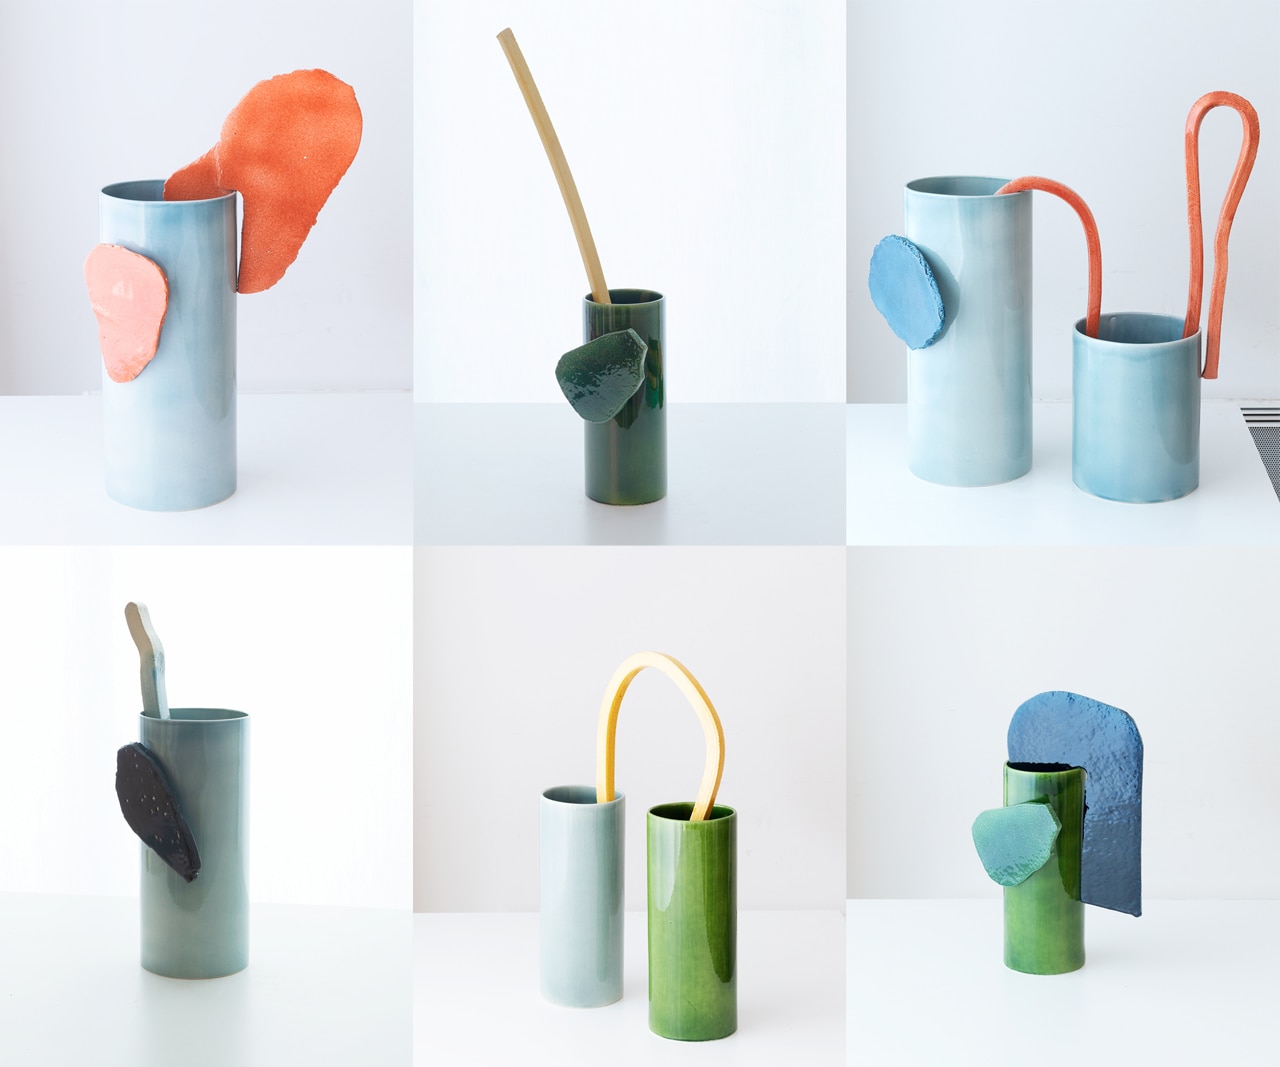 Vases Découpage: extruded in vases by Bouroullec - Domus